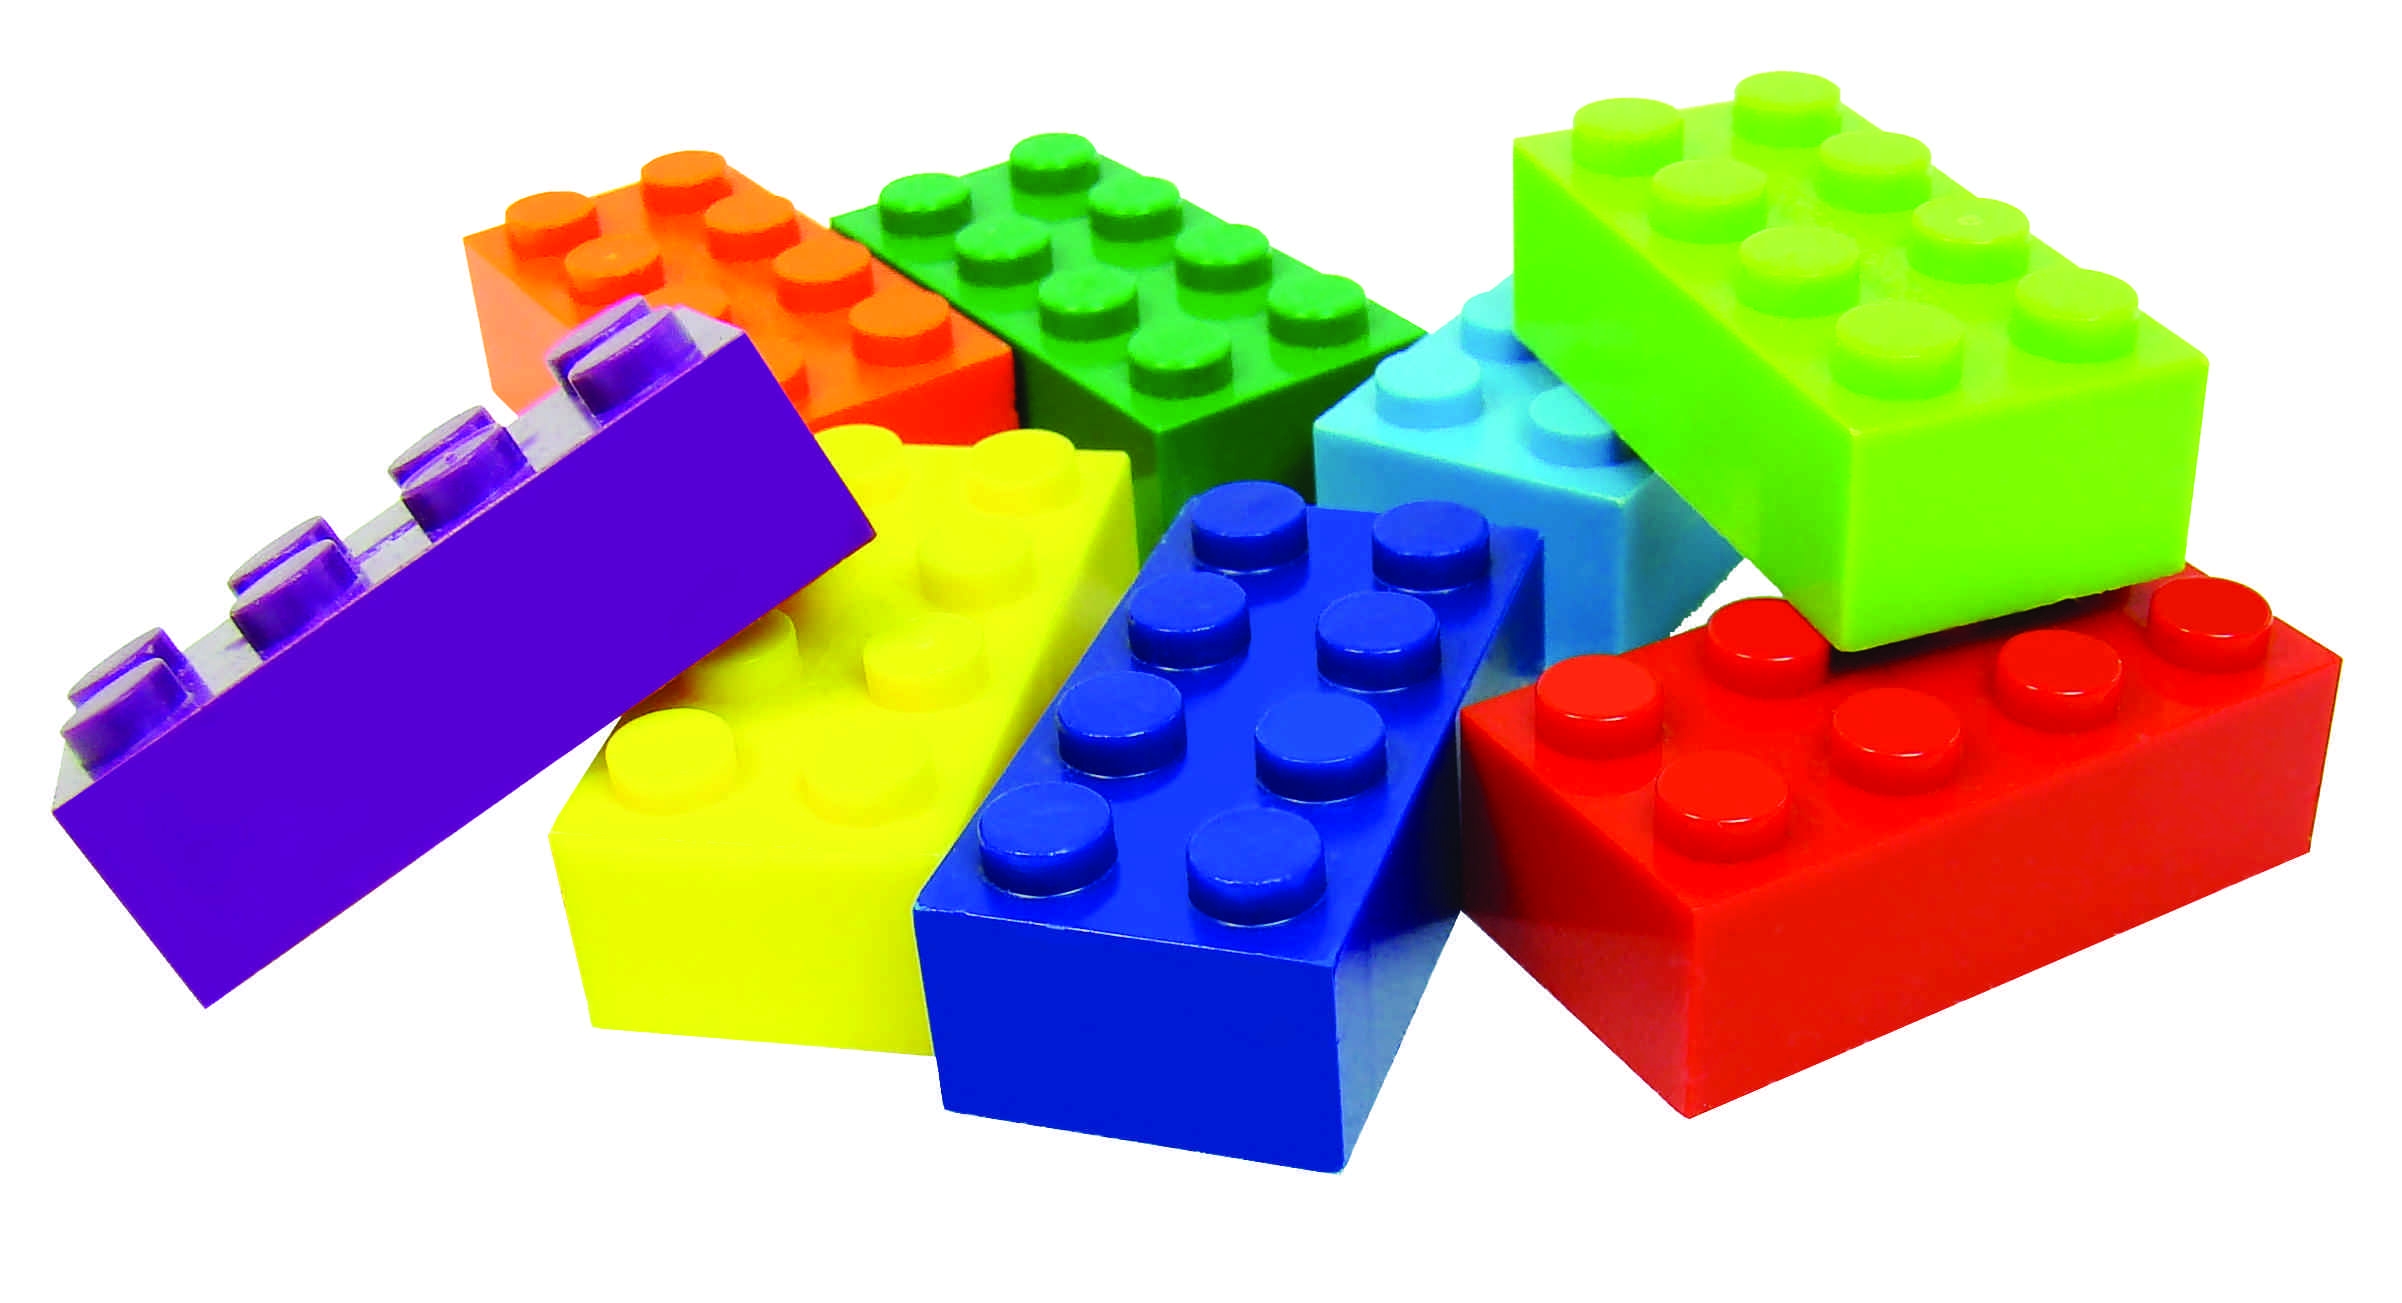 Lego Template Ppt